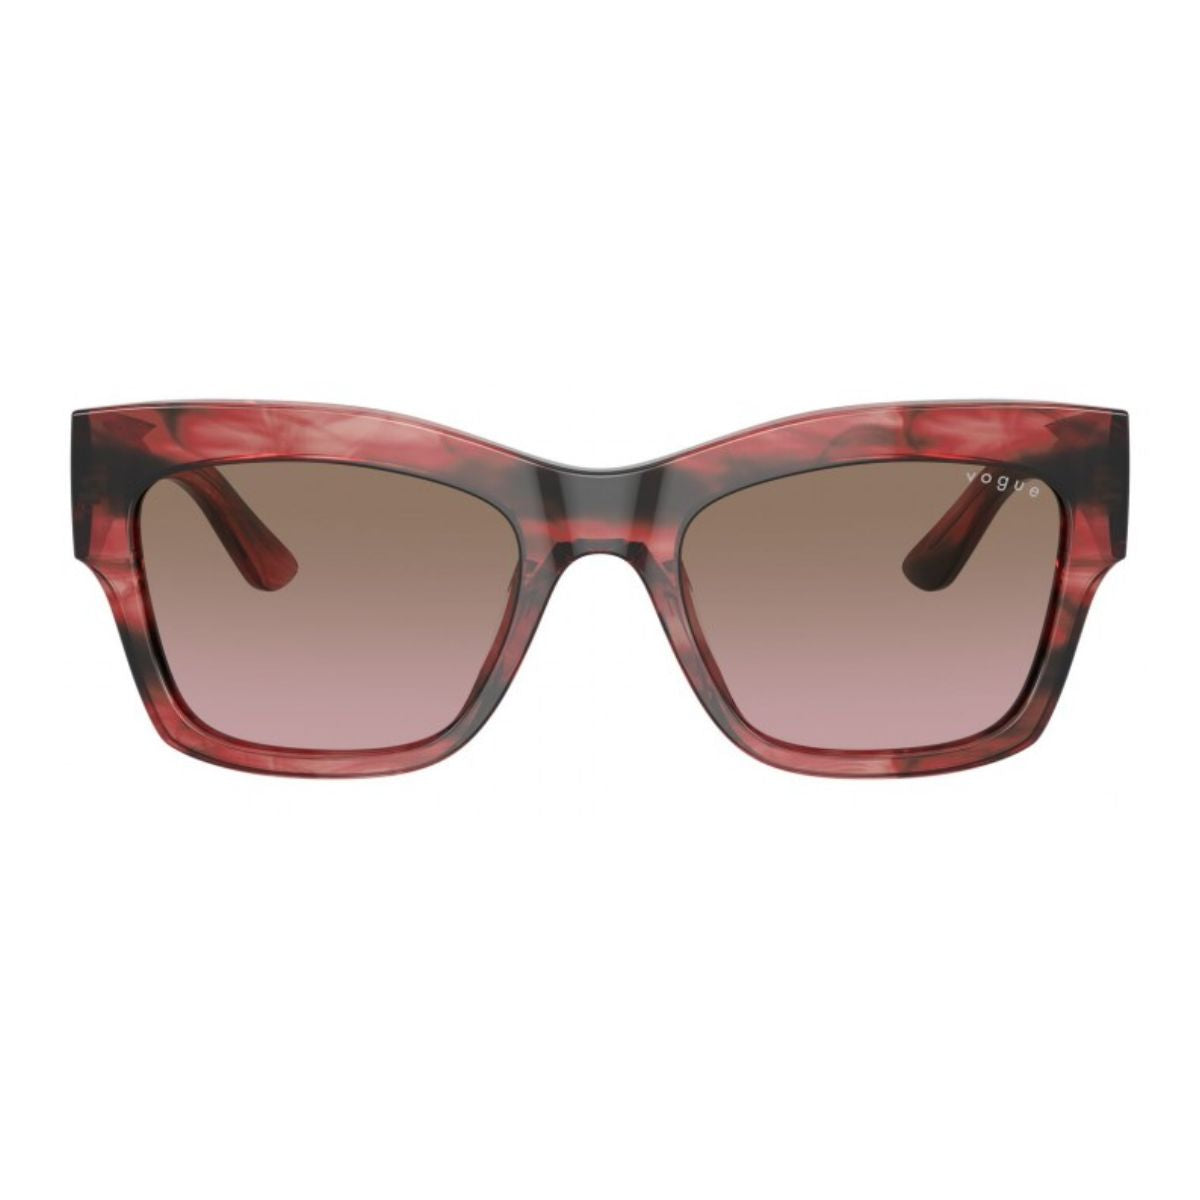 "Buy Stylish Rectangle Sunglasses For Women's At Online | Optorium"